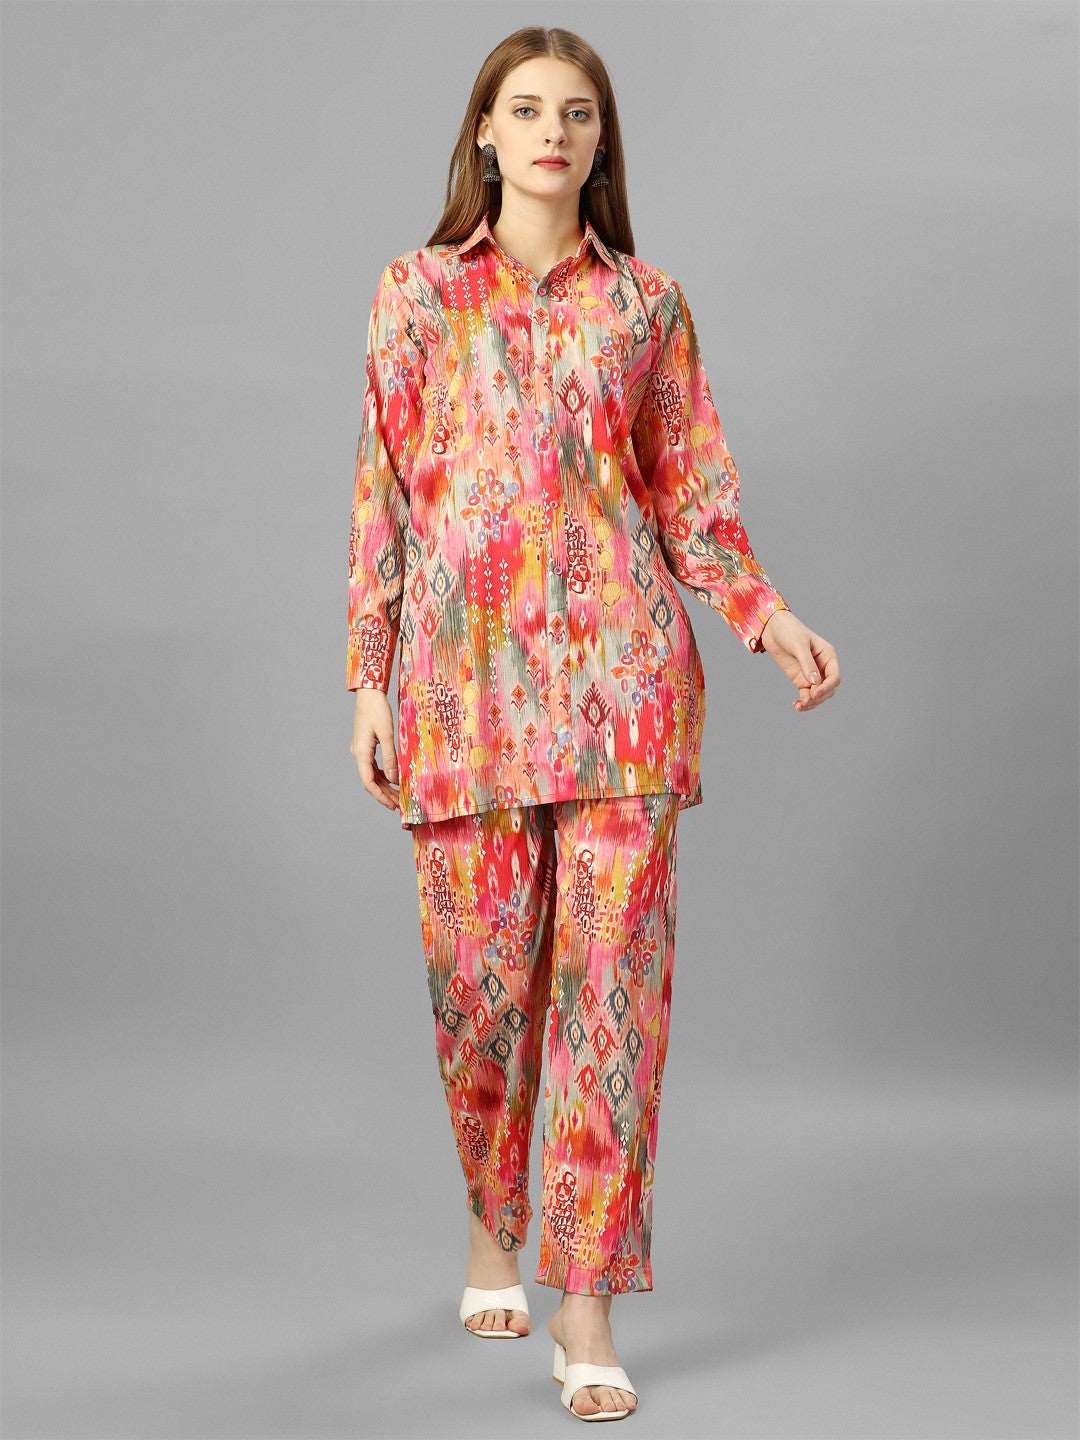 The model in the image is wearing Orange Floral Cotton Co-Ord Set from Alice Milan. Crafted with the finest materials and impeccable attention to detail, the  looks premium, trendy, luxurious and offers unparalleled comfort. It’s a perfect clothing option for loungewear, resort wear, party wear or for an airport look. The woman in the image looks happy, and confident with her style statement putting a happy smile on her face.